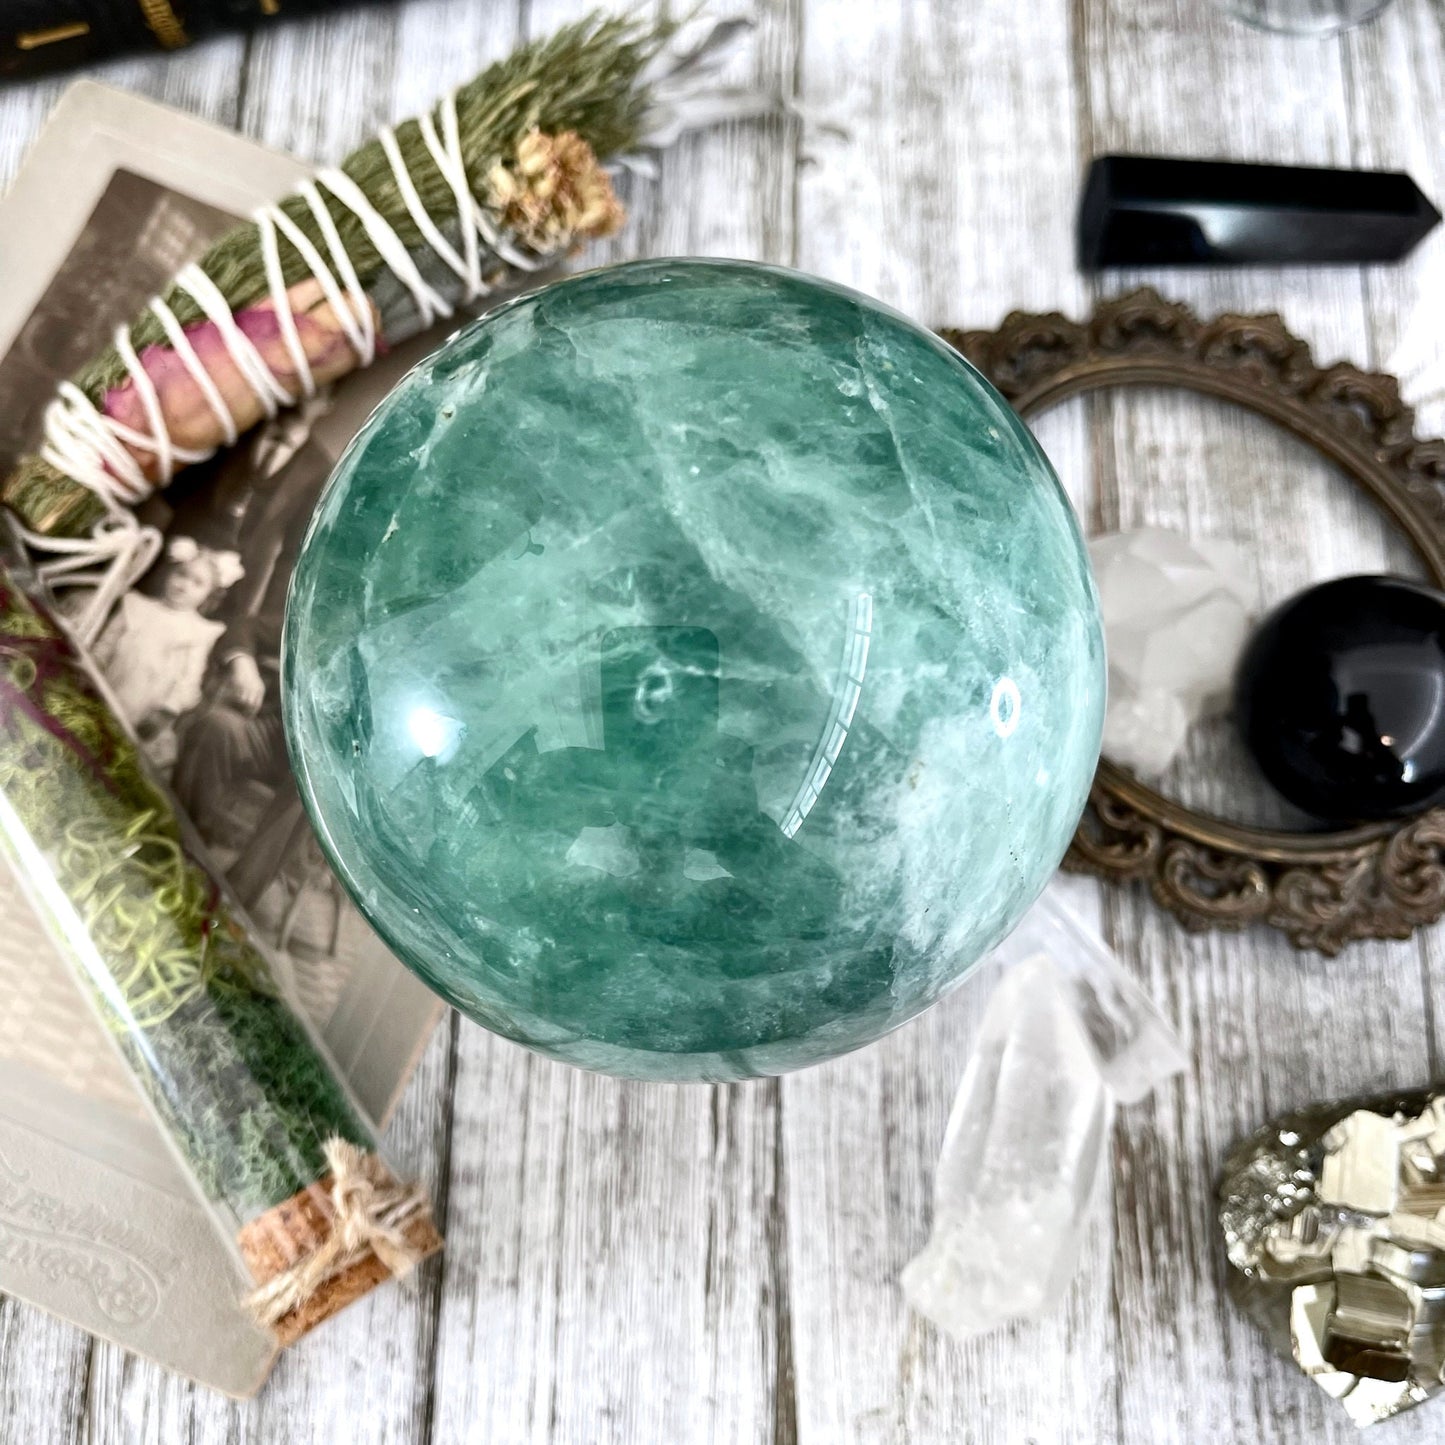 Big Crystal, Crystal cluster, Crystal Decor, Crystal Geode, Crystal Point, Crystal Sphere, Crystals, Etsy ID: 1590679461, Fluorite, Green Fluorite, healing crystals, Home & Living, Home Decor, large crystal, Rocks & Geodes